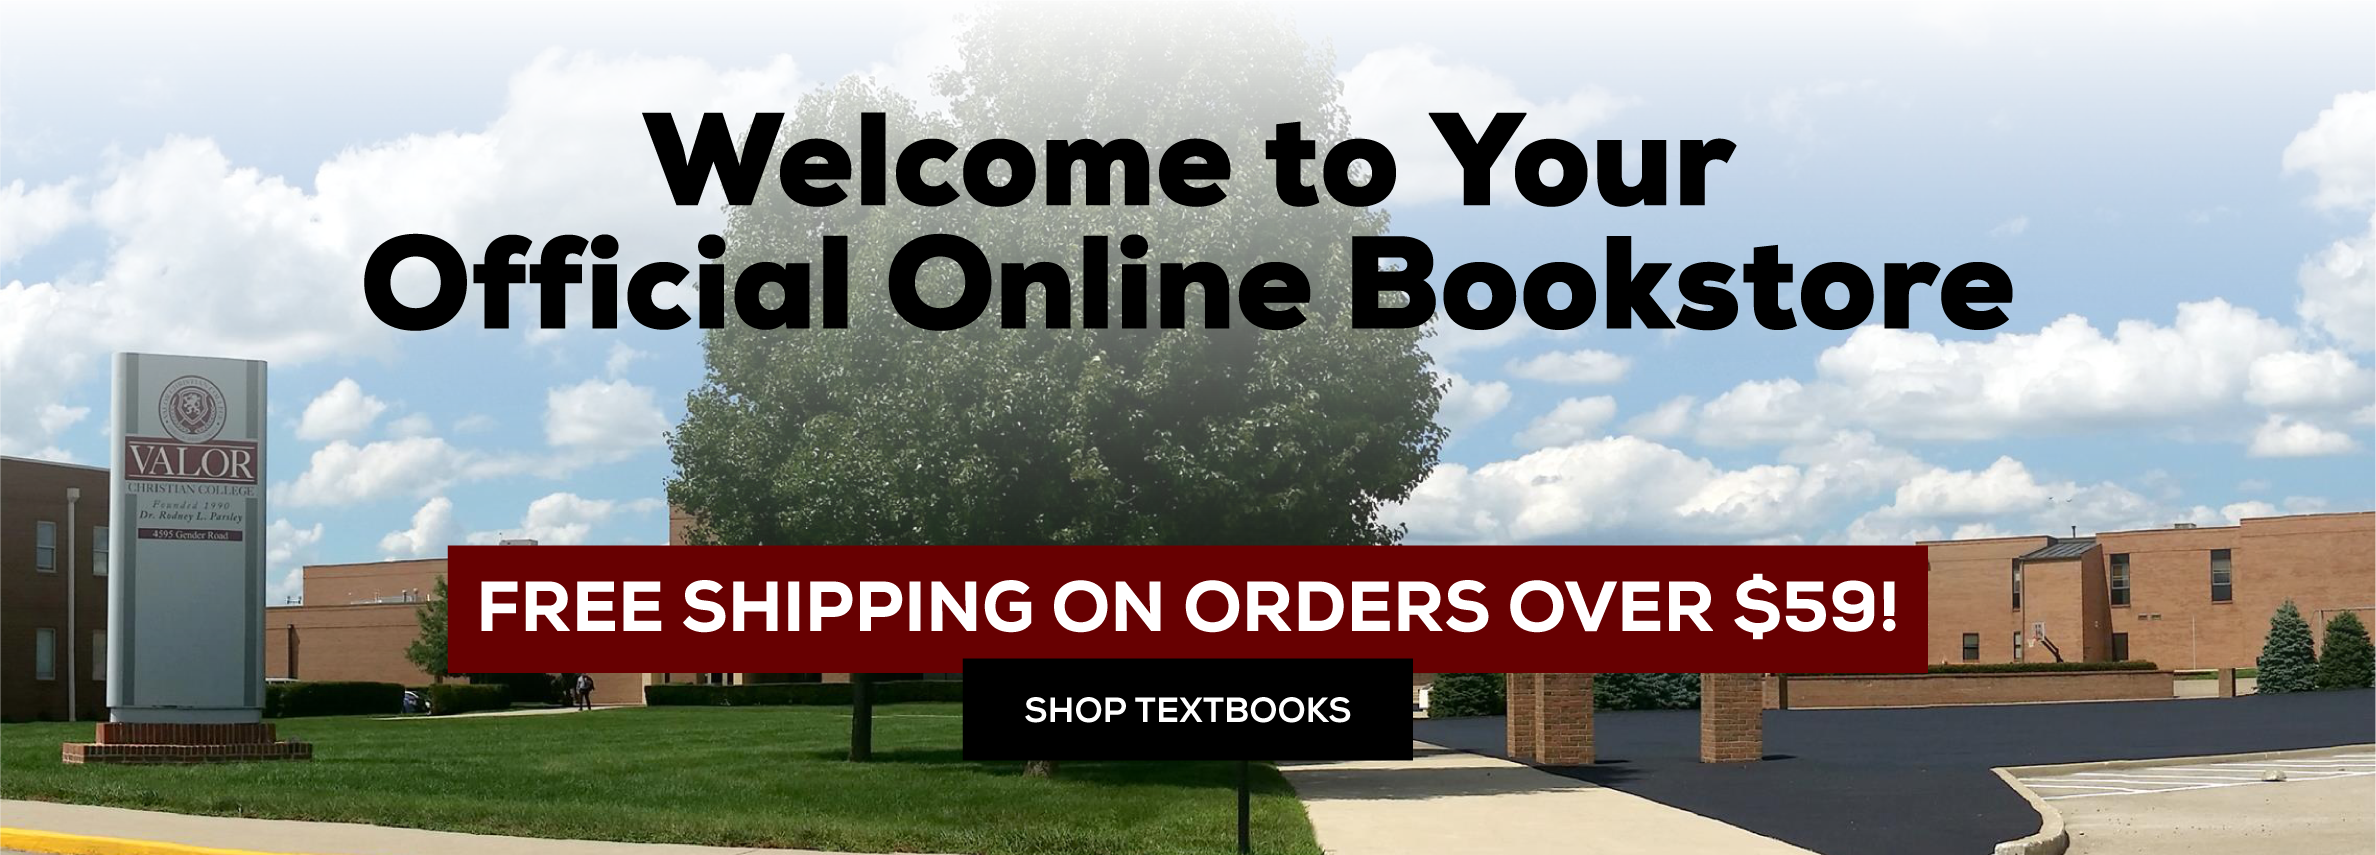 Welcome to Your Official Online Bookstore. Free shipping on orders over $59! Shop Textbooks.